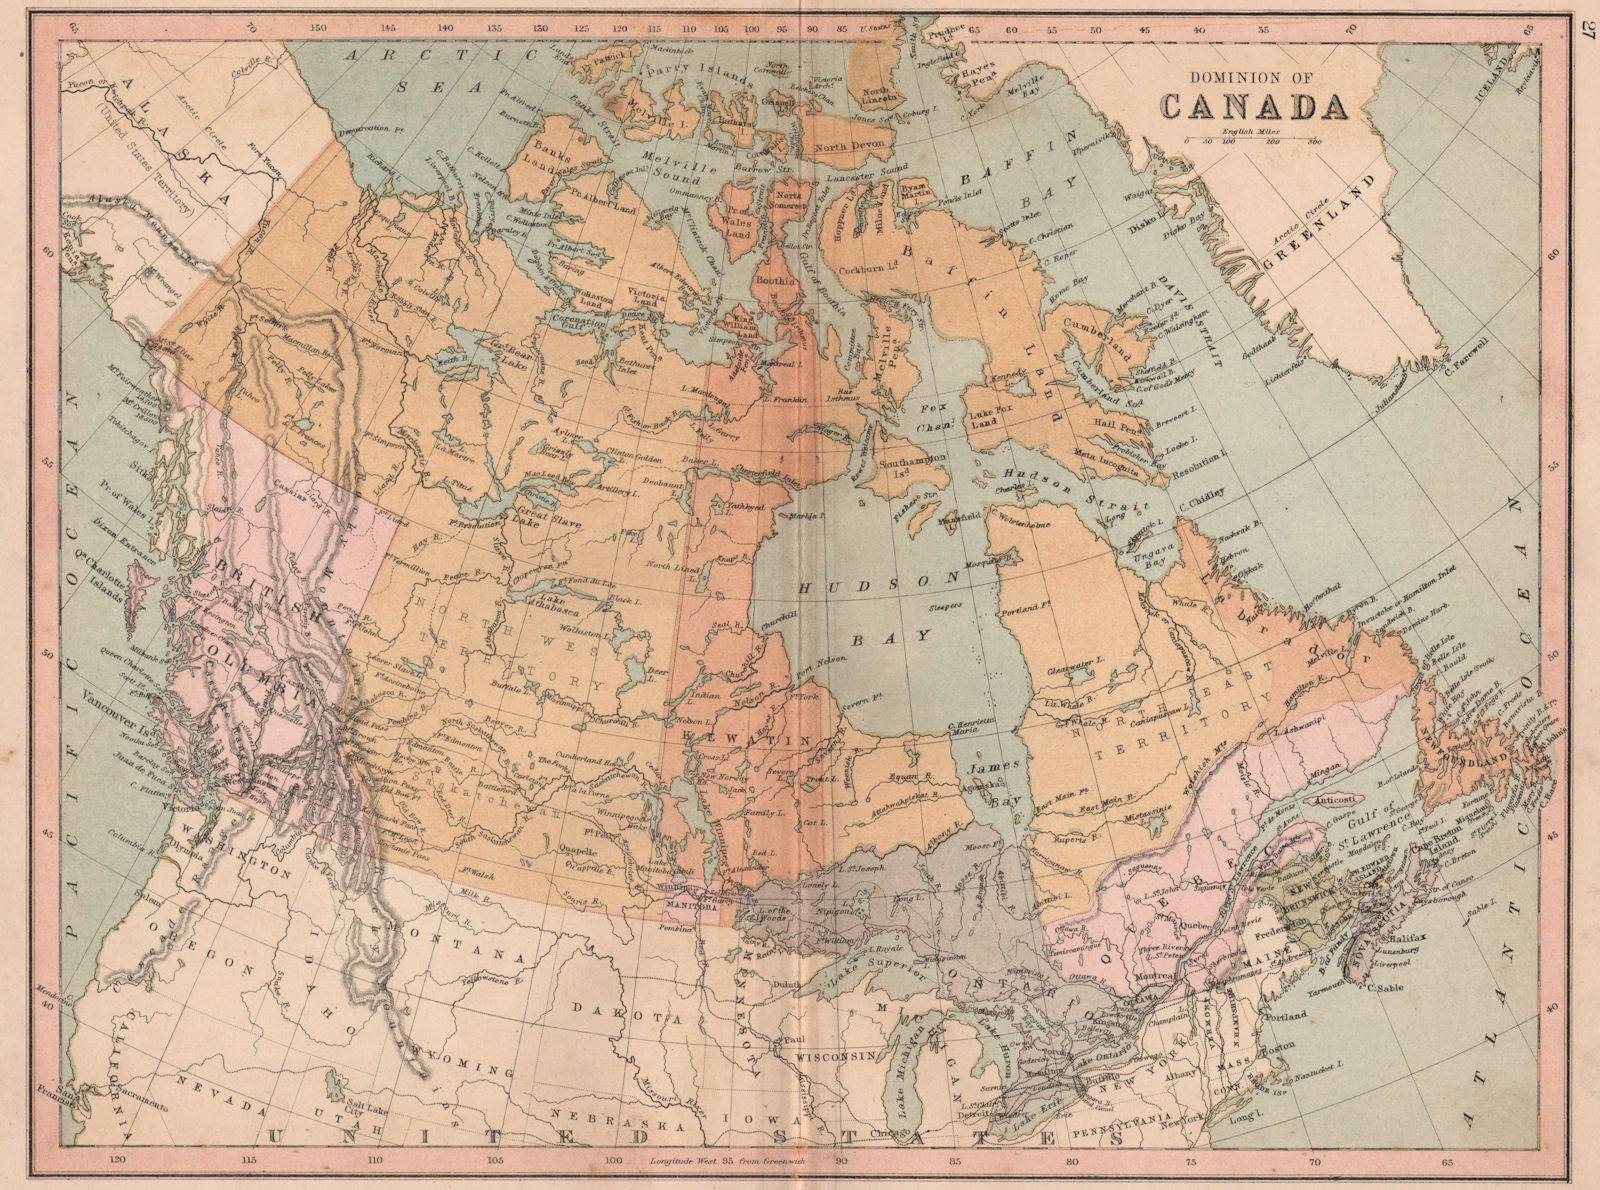 CANADA. Most of Quebec shown as "North East Territory". COLLINS 1880 old map